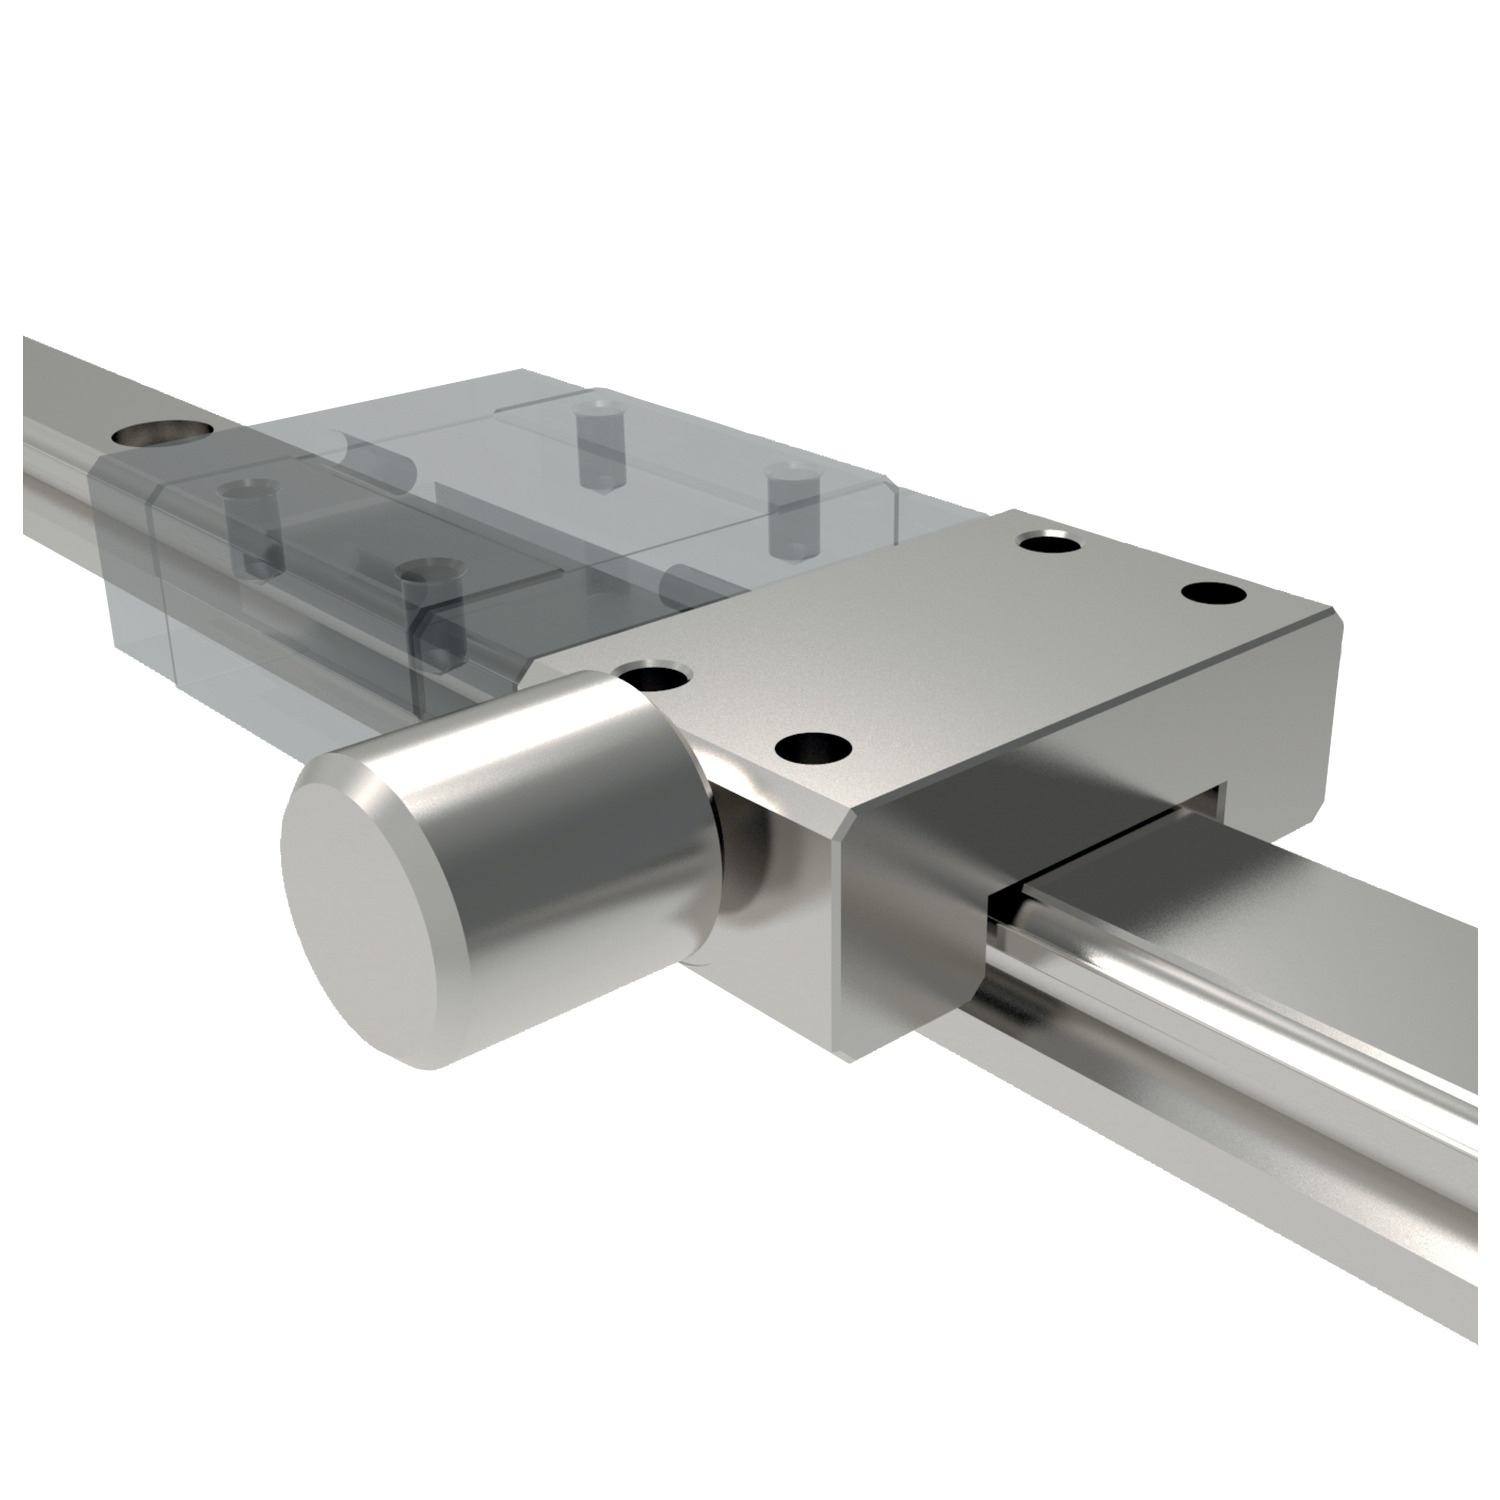 Manual Clamps for Miniature Rail Manually-tightened clamp for miniature guide rails. Made from corrosion resistant hardened stainless steel (similar to AISI 440C).